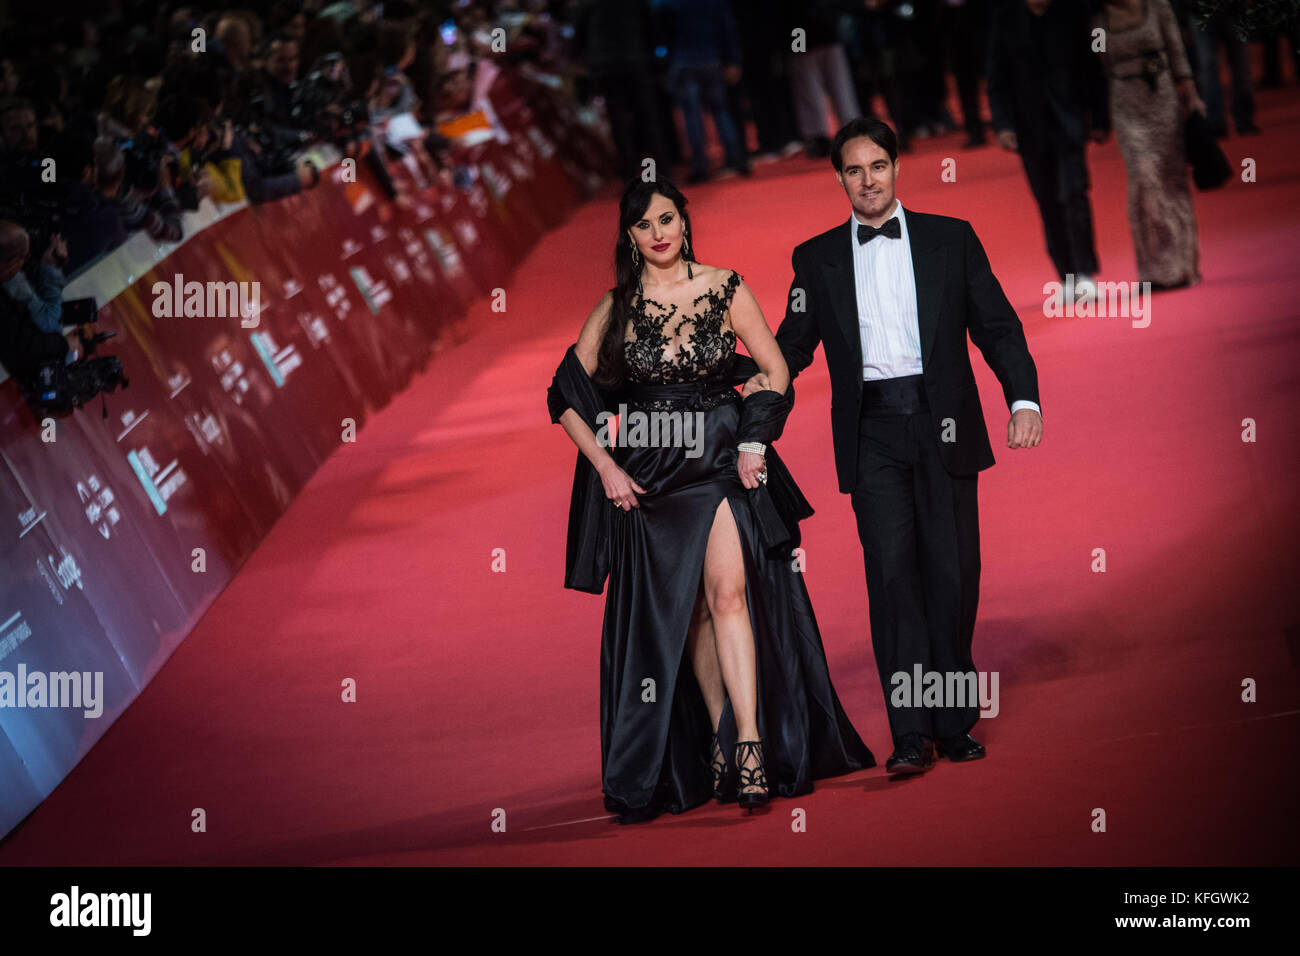 Rome, Italy. 28th Oct, 2017. Rome, Italy October 28, 2017, JIsabelle Adriani and Vittorio Palazzi walk a red carpet for 'Stronger' during the 12th Rome Film Fest at Auditorium Parco Della Musica on October 28, 2017 in Rome, Italy. ( Credit: Andrea Ronchini/Pacific Press/Alamy Live News Stock Photo